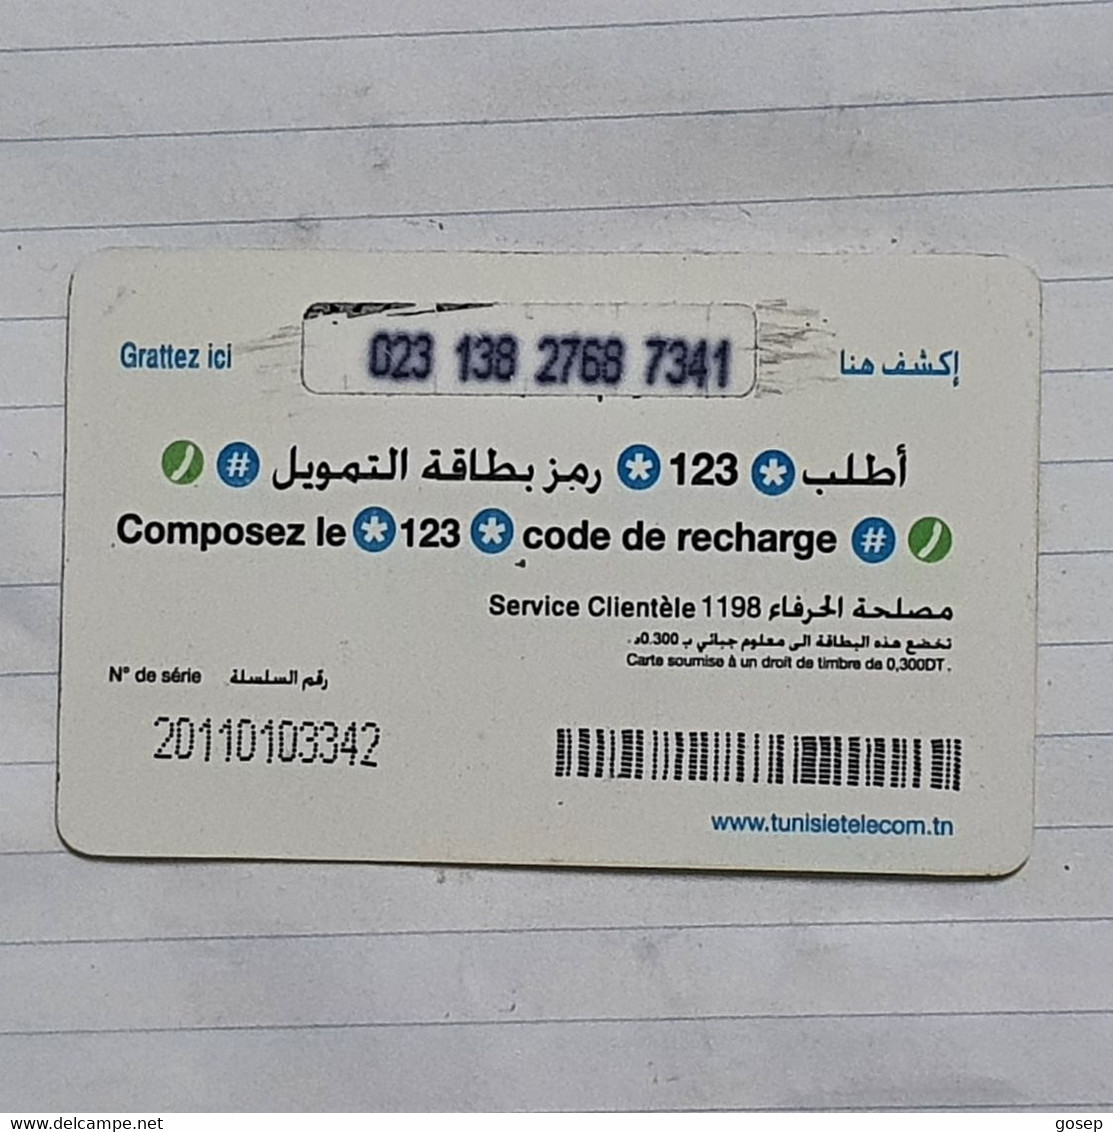 TUNISIA-(TN-TTL-REF-0032A)-GIRL1-(97)-(023-138-2768-7341)-(11/98)-(look From Out Side Card-BARCODE)-used Card - Tunisie